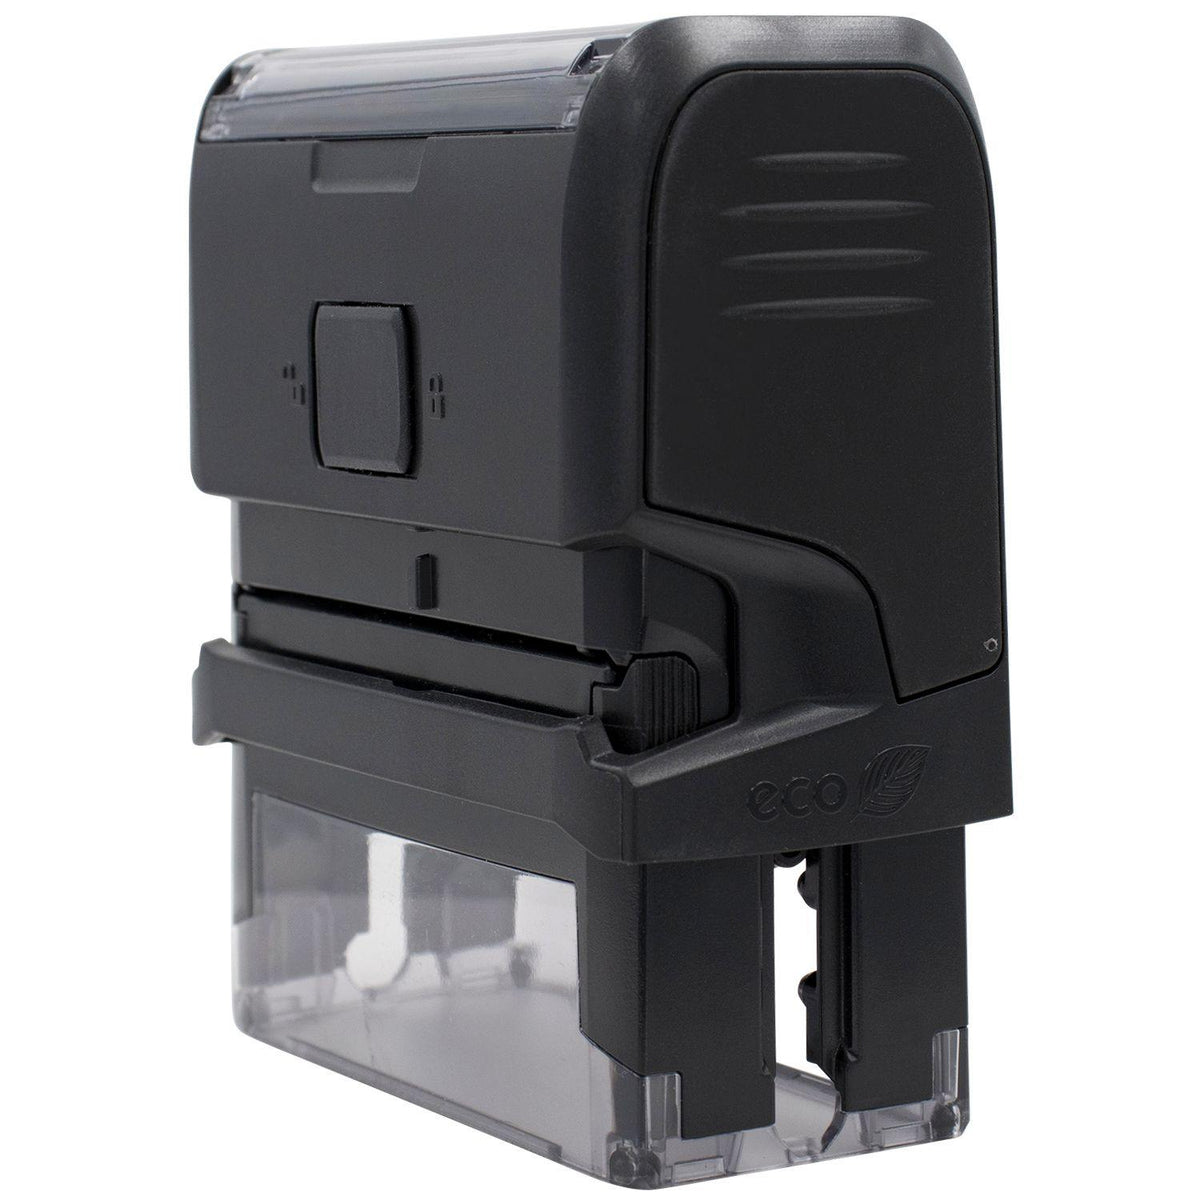 Large Self Inking Wow Stamp - Engineer Seal Stamps - Brand_Trodat, Impression Size_Large, Stamp Type_Self-Inking Stamp, Type of Use_Teacher